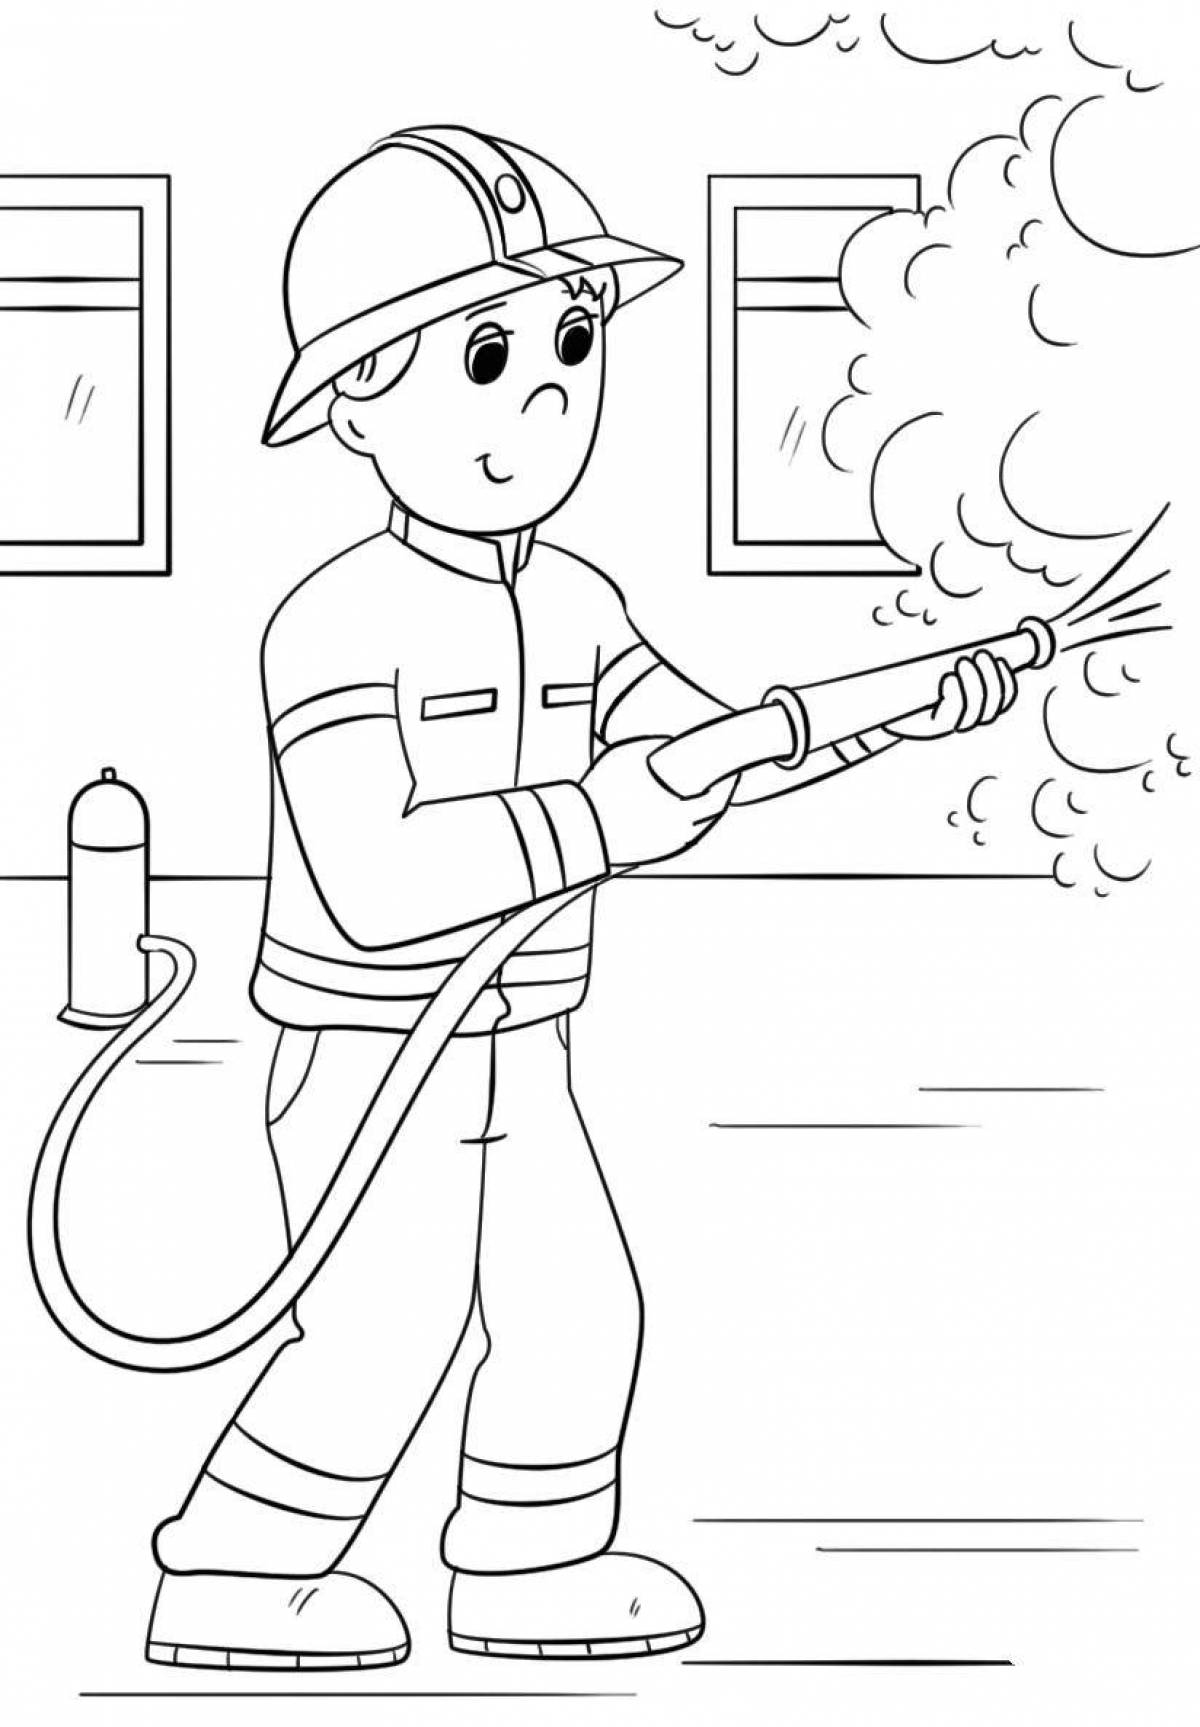 A cheeky drawing of a firefighter